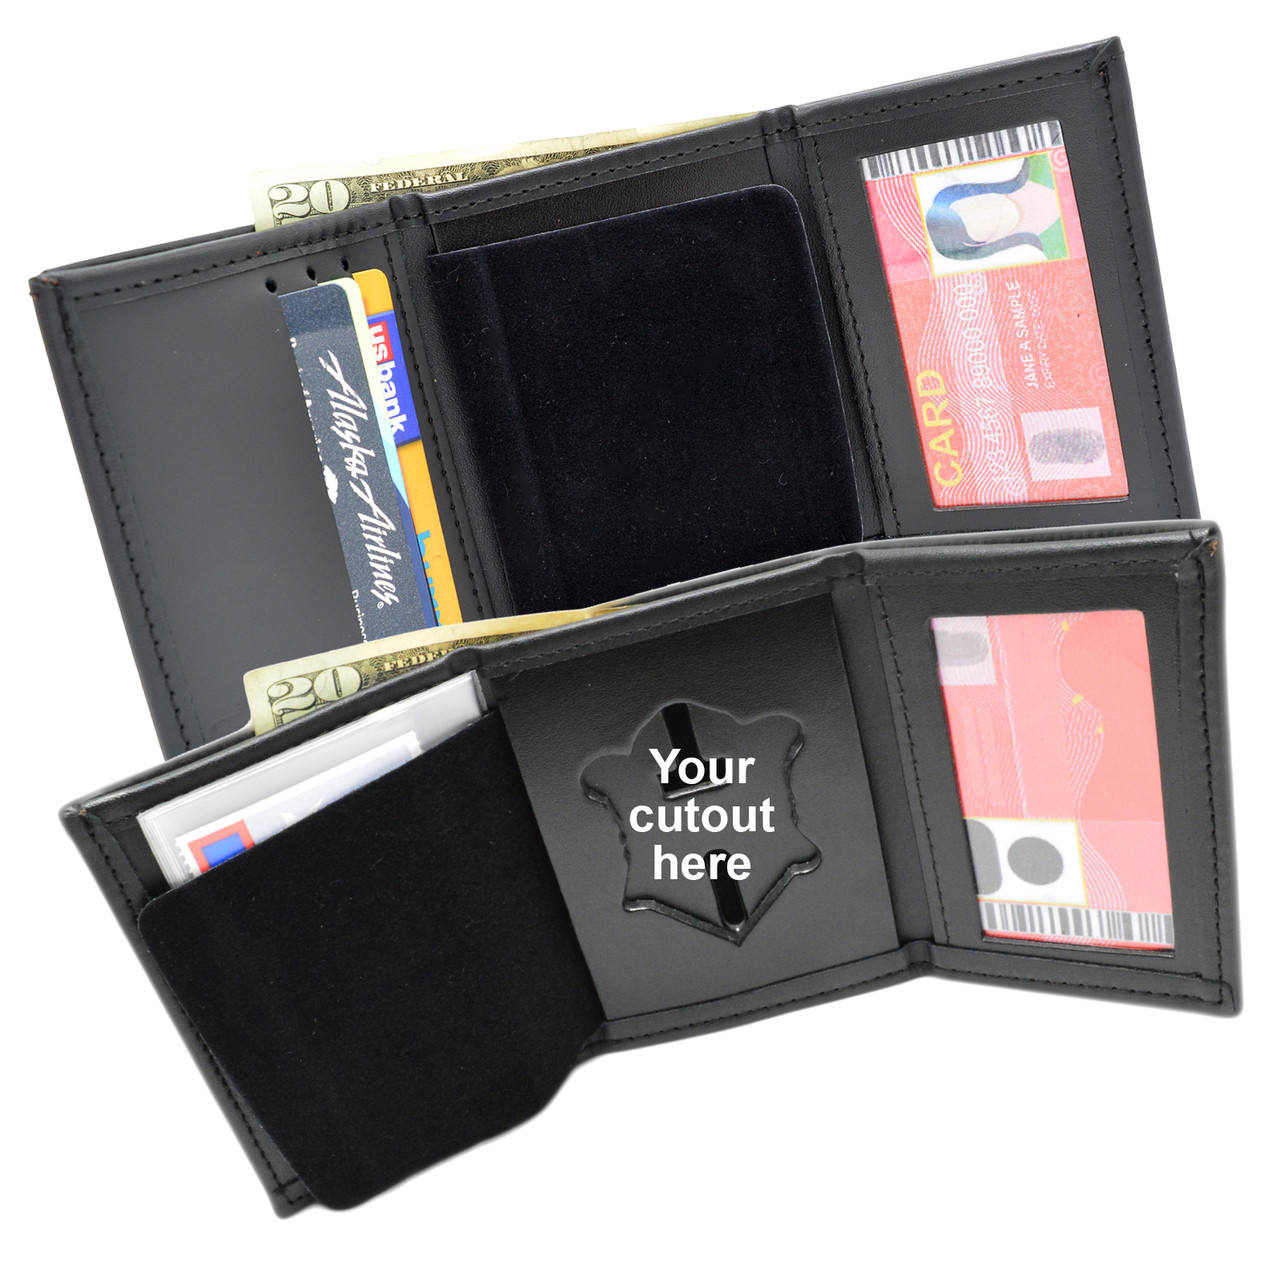 Perfect Fit Model 101 Trifold Badge Wallet | Trifold Badge Wallet ...